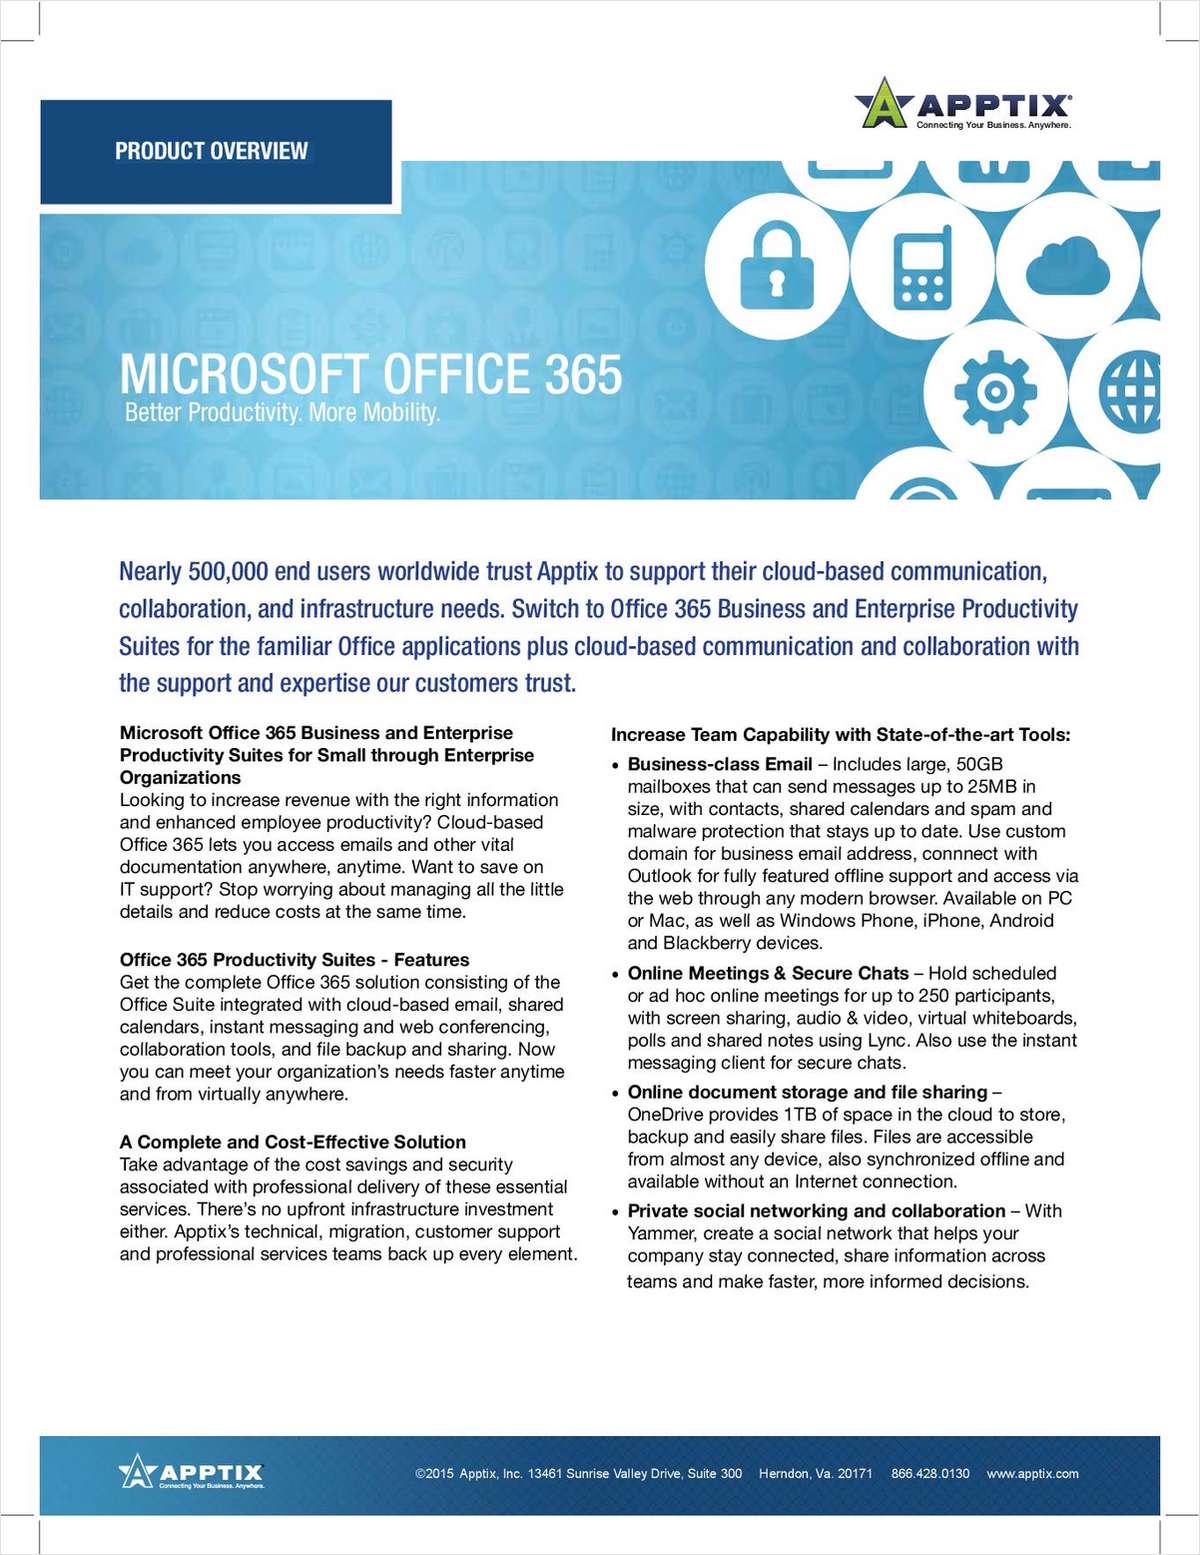 Microsoft Office 365 Business and Enterprise Productivity Suites for Small through Enterprise Organizations